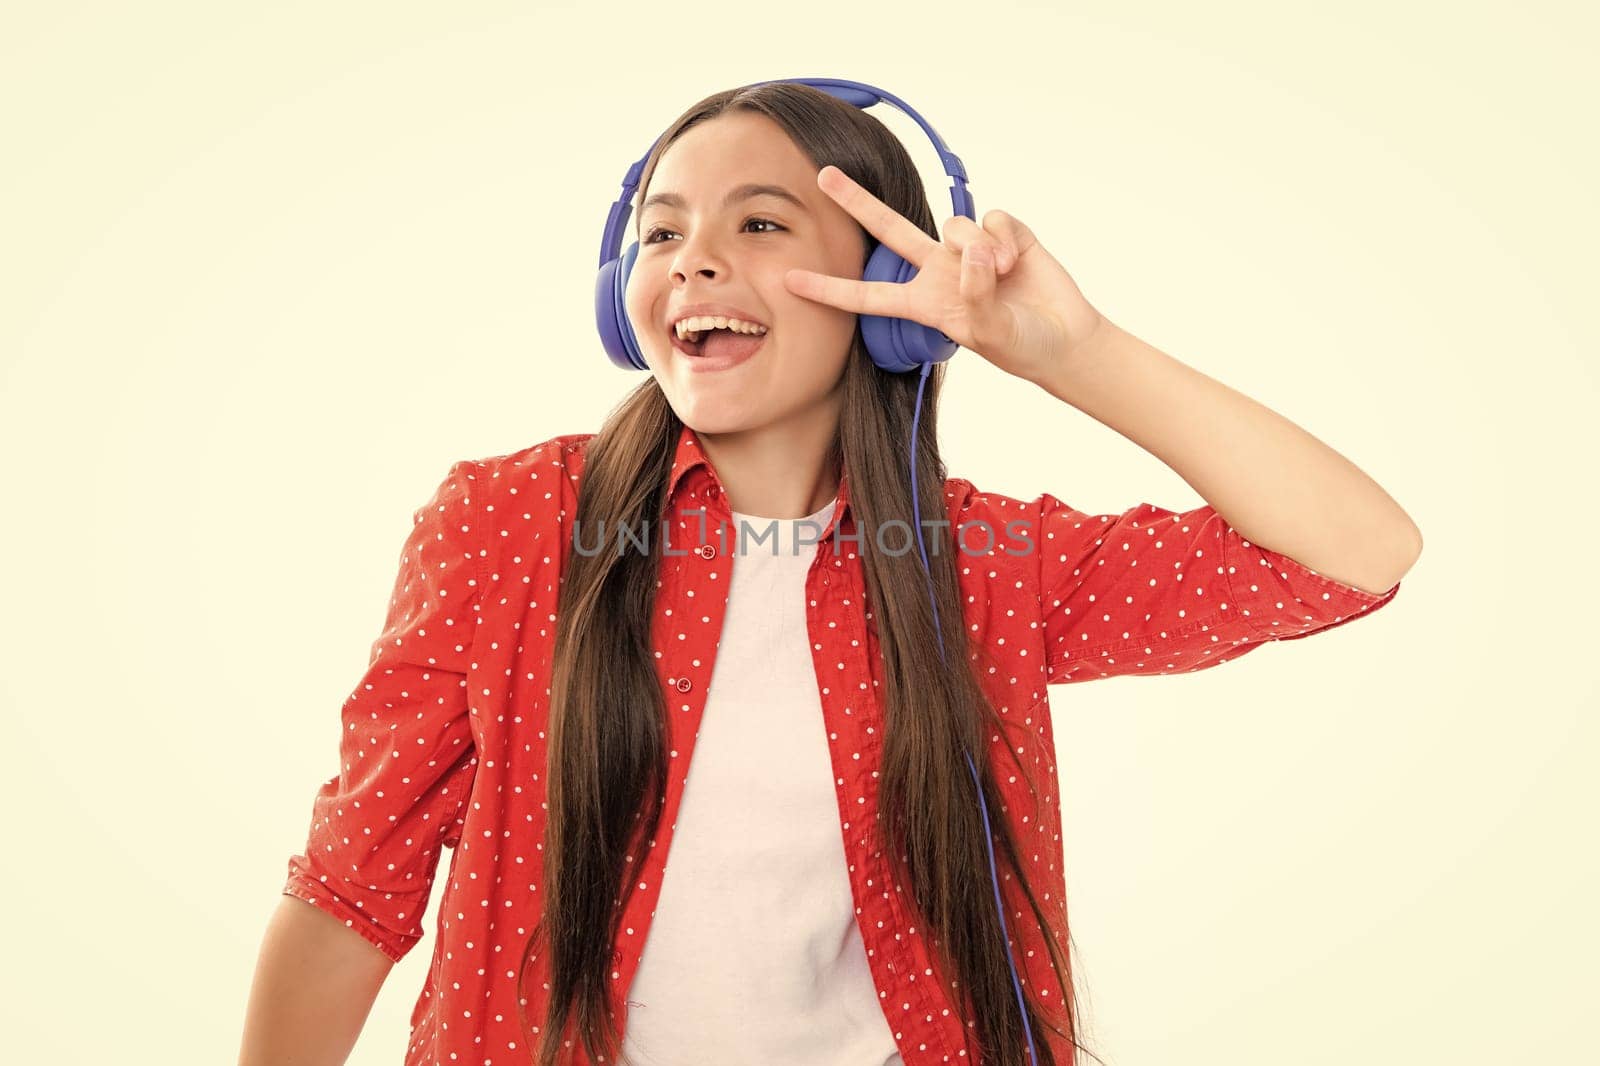 Young teen child listening music with headphones. Girl listening songs via wireless headphones. Wireless headset device accessory. Portrait of emotional amazed excited teen girl. by RedFoxStudio